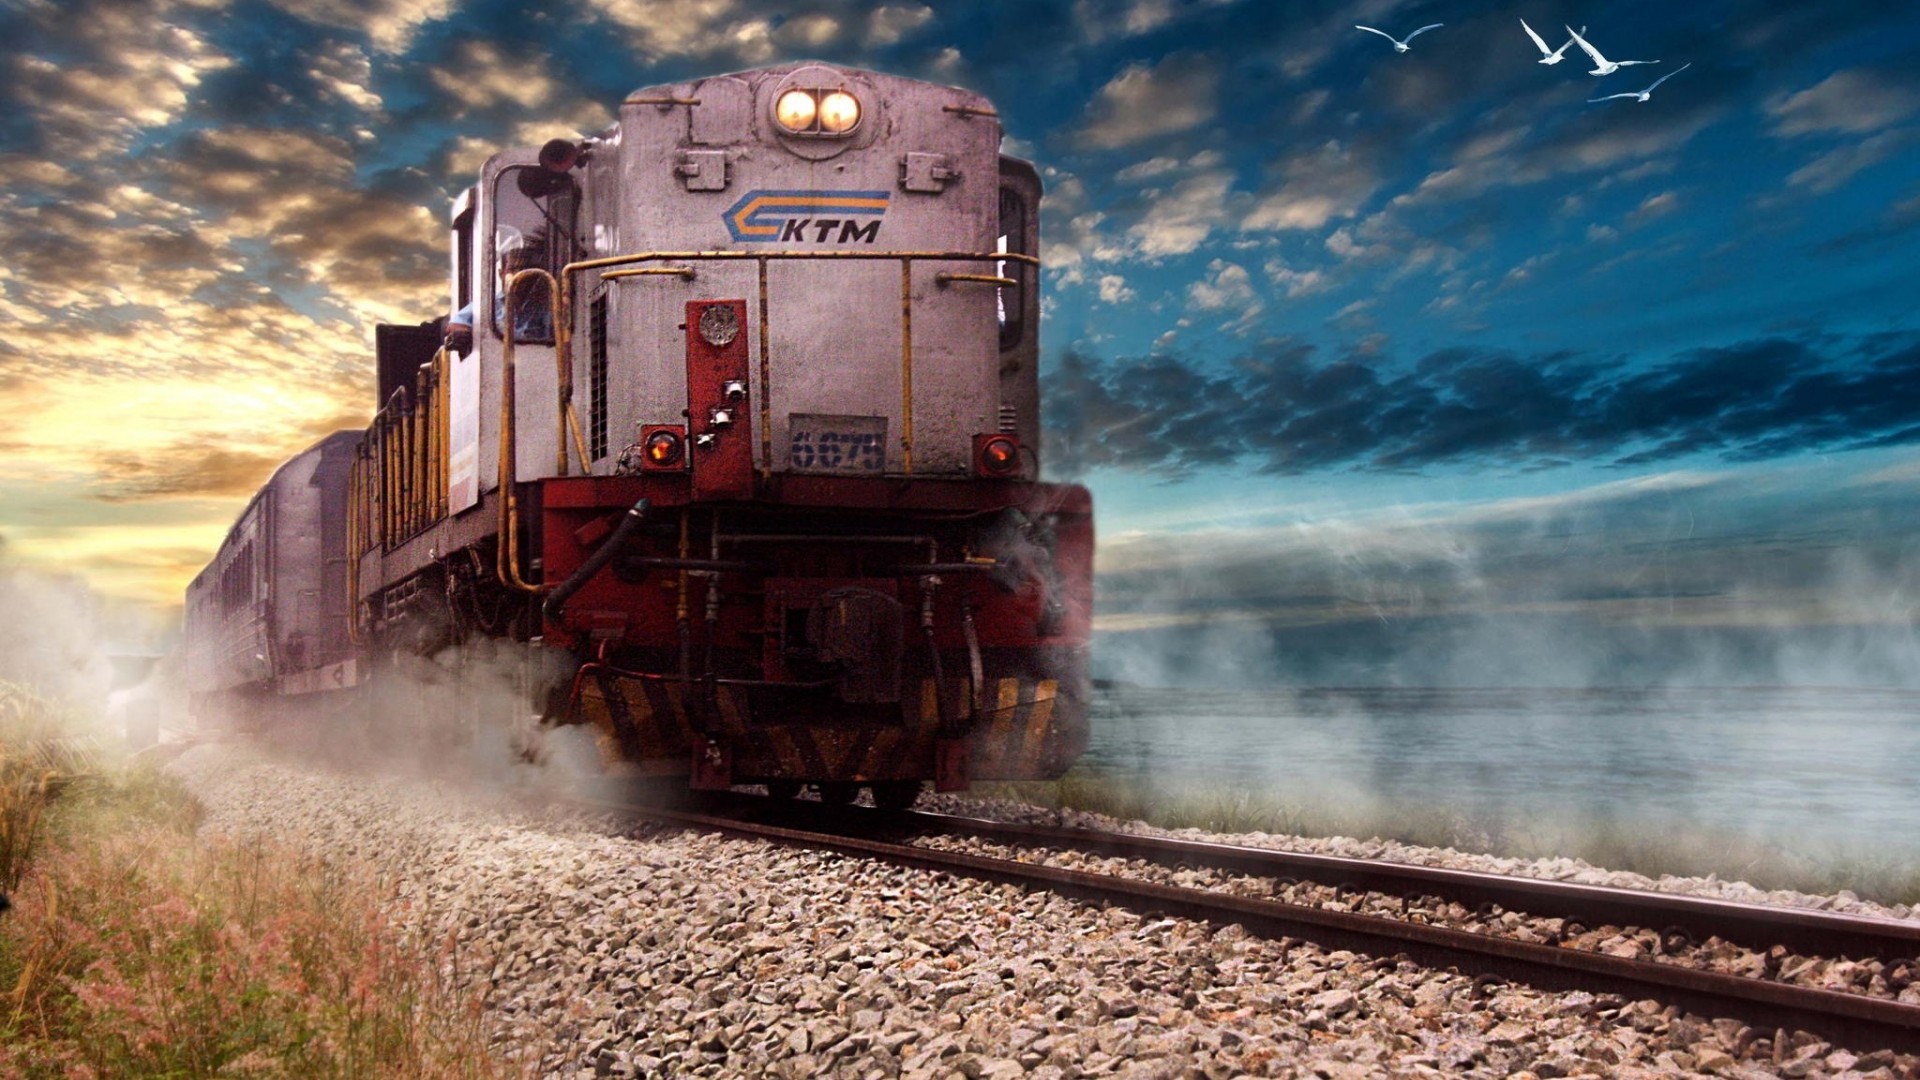 1920x1080 Train Wallpapers, Live Train Wallpapers, TH563 Train Backgrounds ...